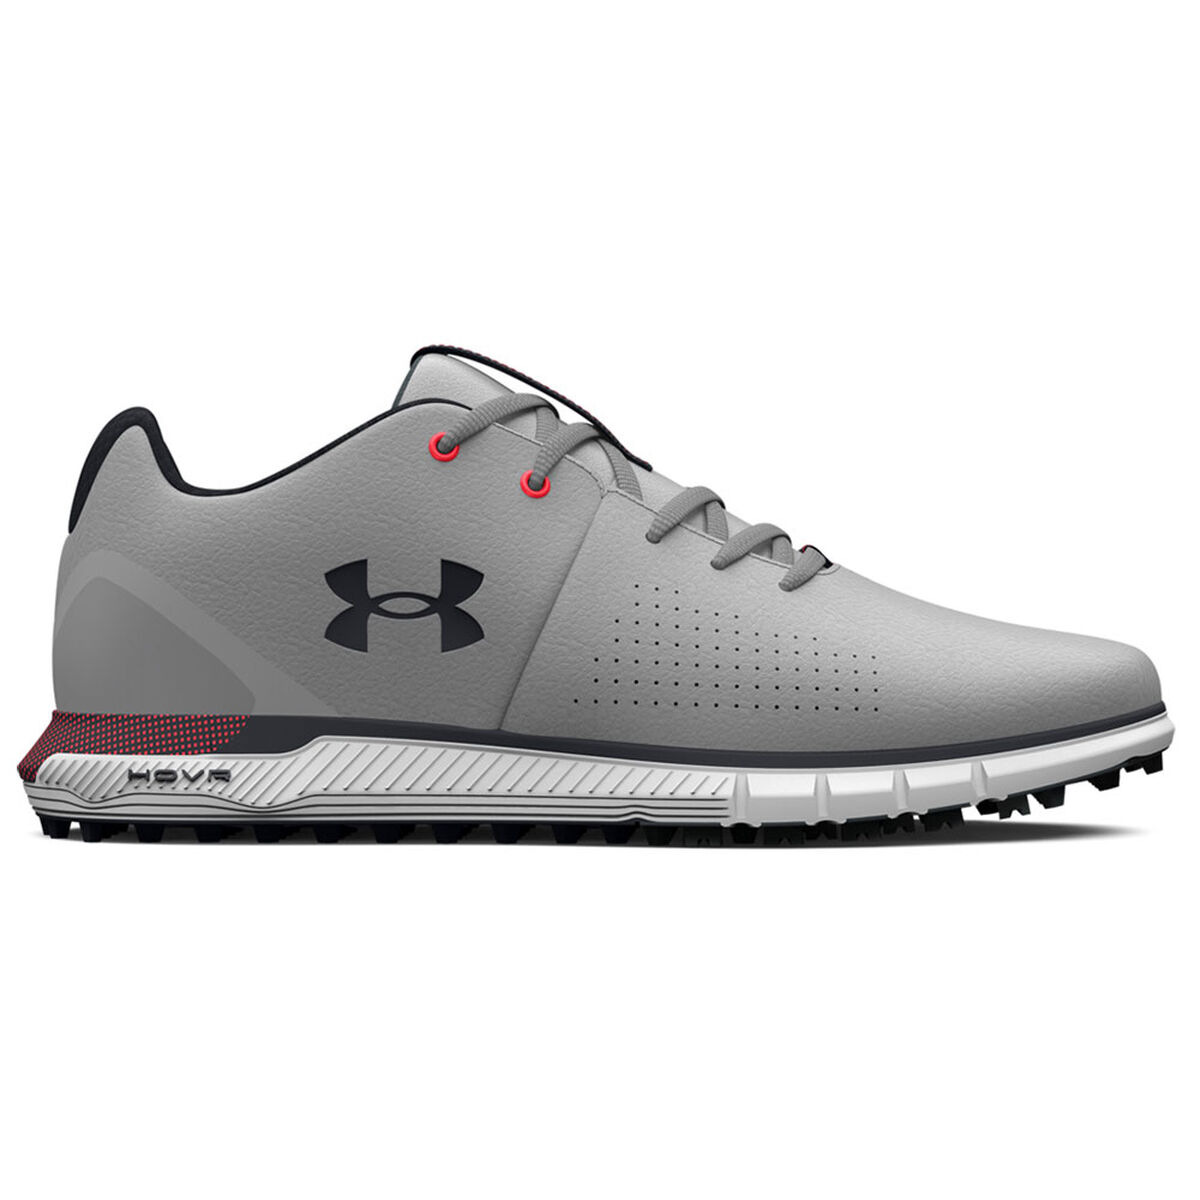 Under Armour Men’s Grey and Black HOVR Fade 2 Spikeless Golf Shoes, Size: 8 | American Golf